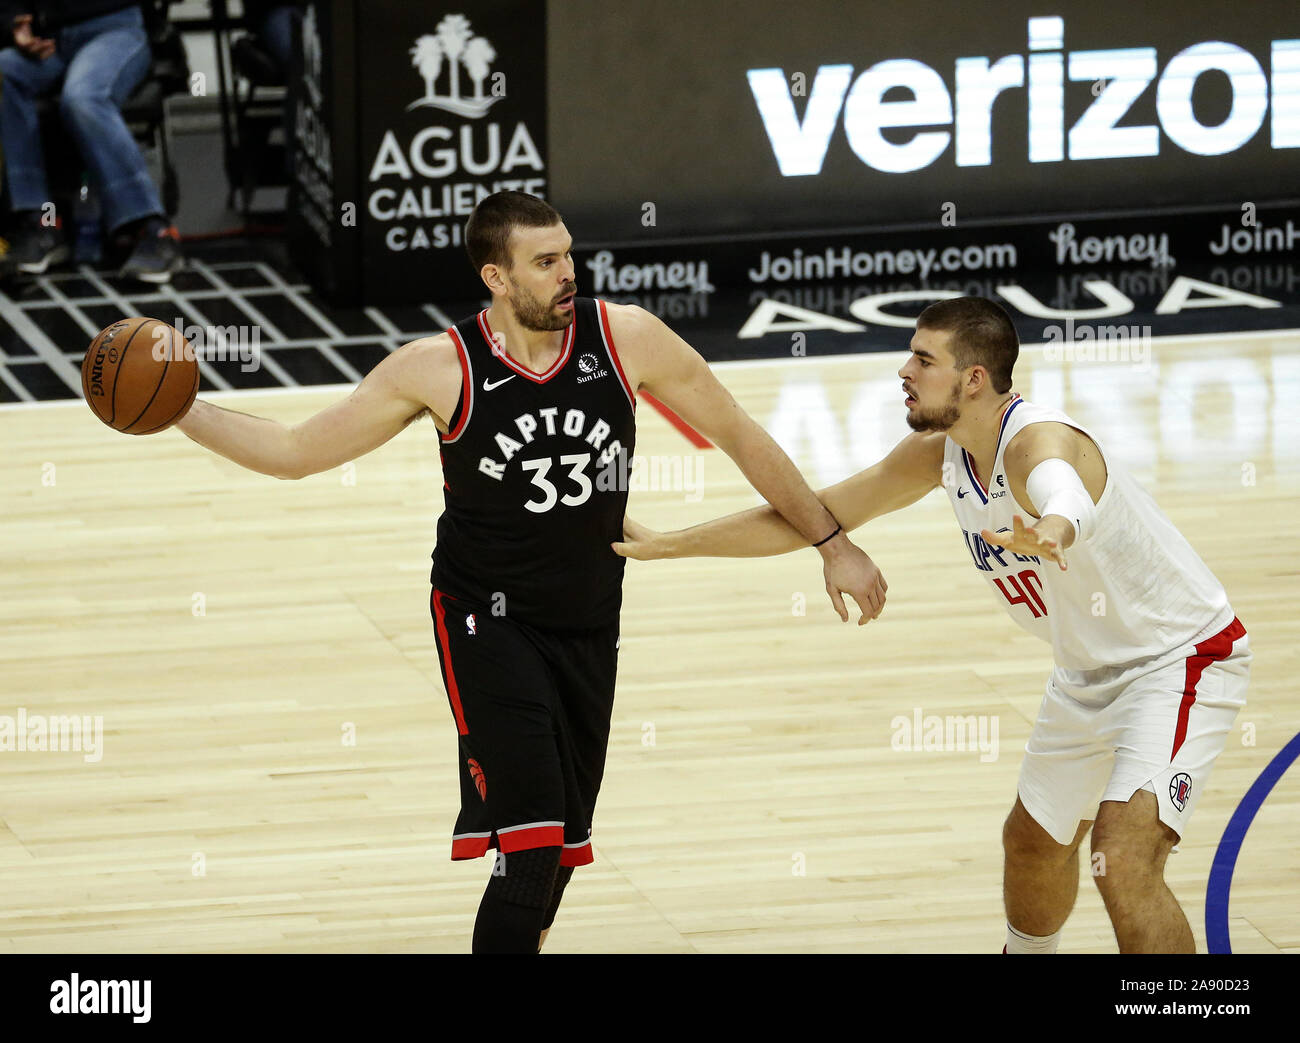 Los Angeles, California, USA. 11th Nov, 2019. Toronto Raptors' Marc Gasol (33) is defended by Los Angeles Clippers' Ivica Zubac (40) during an NBA basketball game between Los Angeles Clippers and Toronto Raptors, Monday, November 11, 2019, in Los Angeles. Credit: Ringo Chiu/ZUMA Wire/Alamy Live News Stock Photo